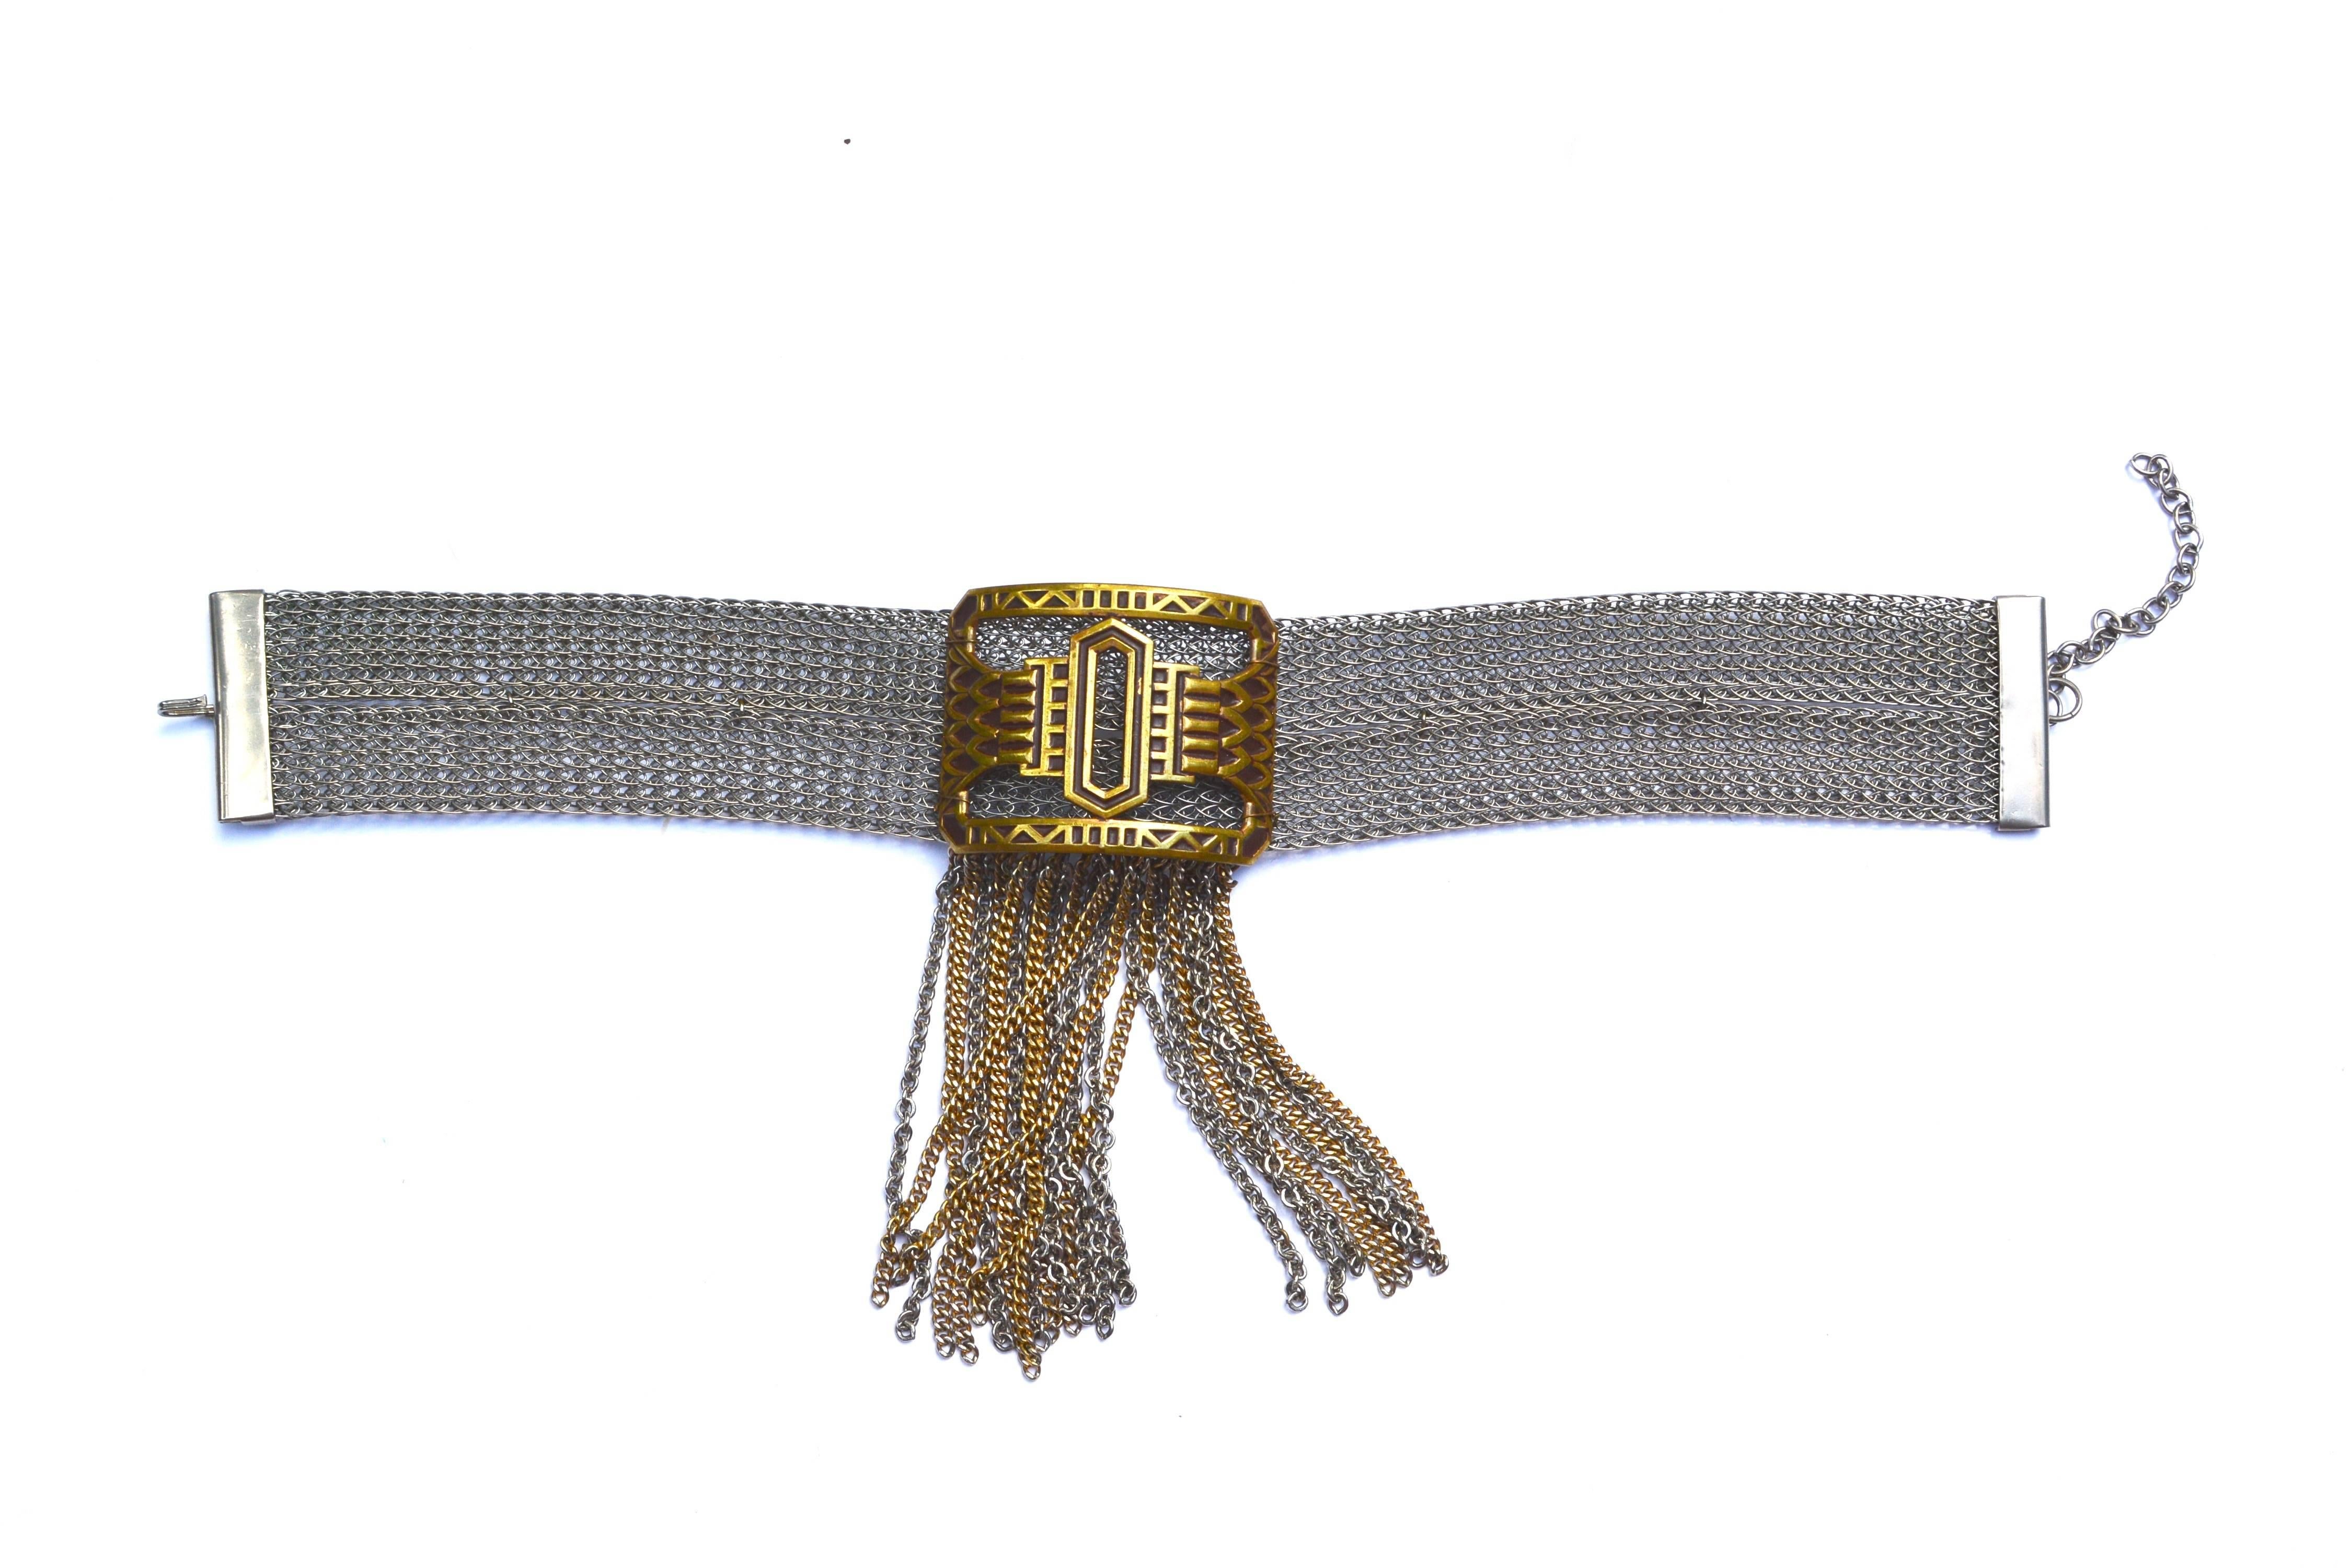 Sandor co deco revival necklace. The company started in 1938 and closed in the early 1970s, so pieces are hard to find. Mesh style choker with signature and deco style enamel buckle and chain fringe. Adjusts up to 15" long x about 1.5"